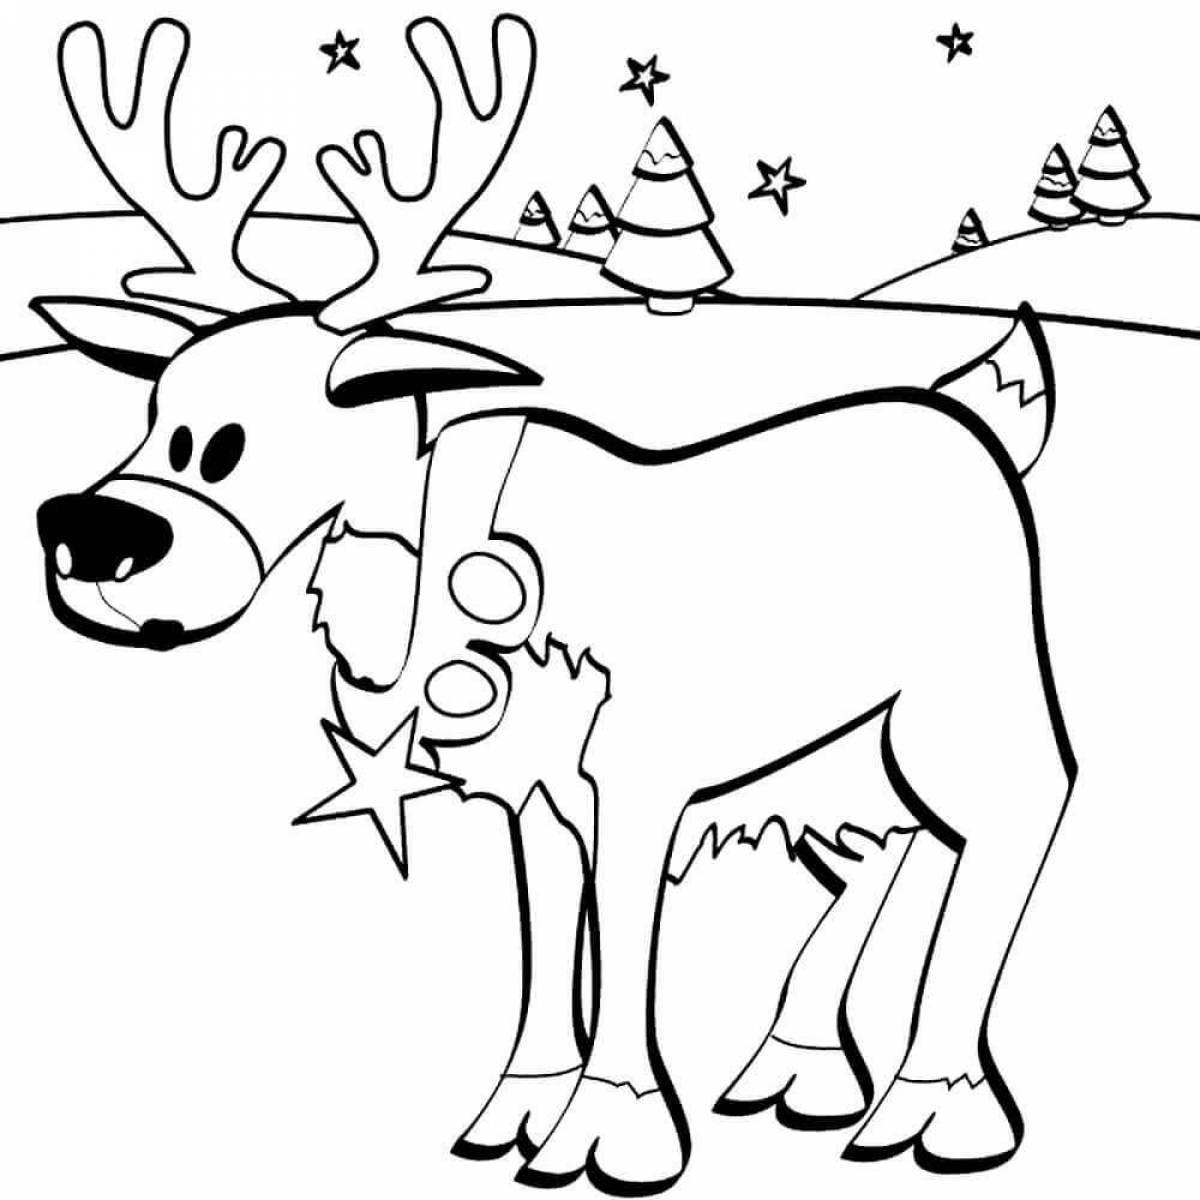 Adorable deer coloring page for kids